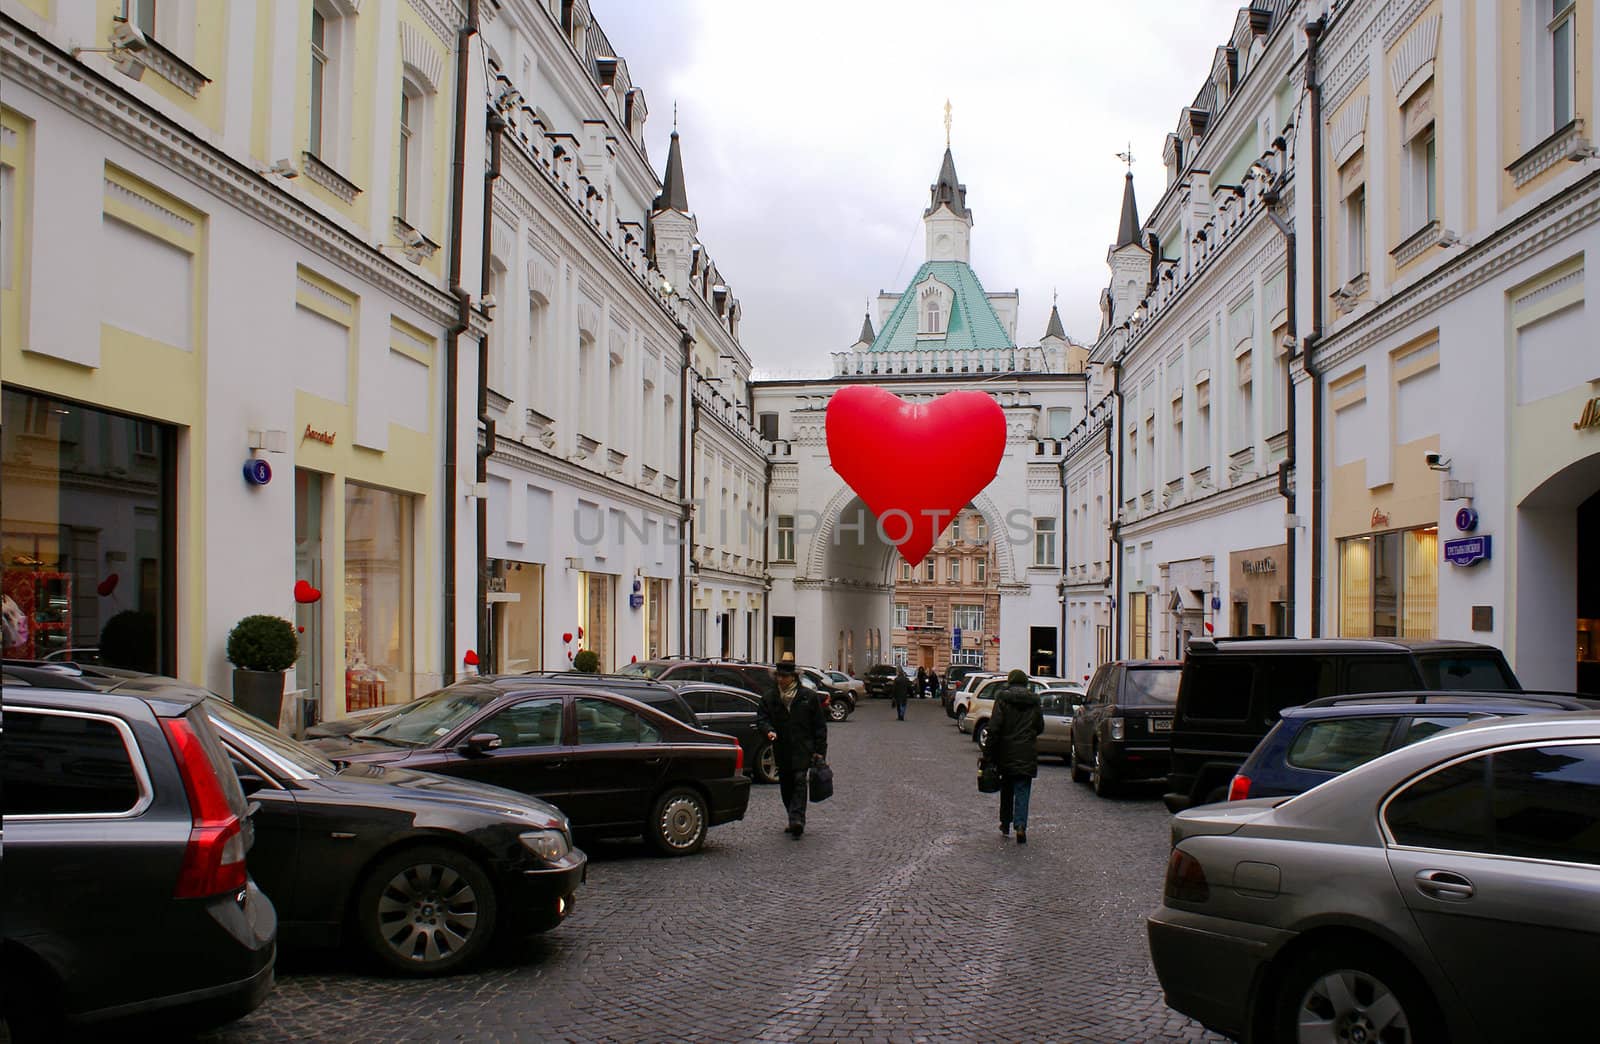 Big red heart ballon is hanging over old street.